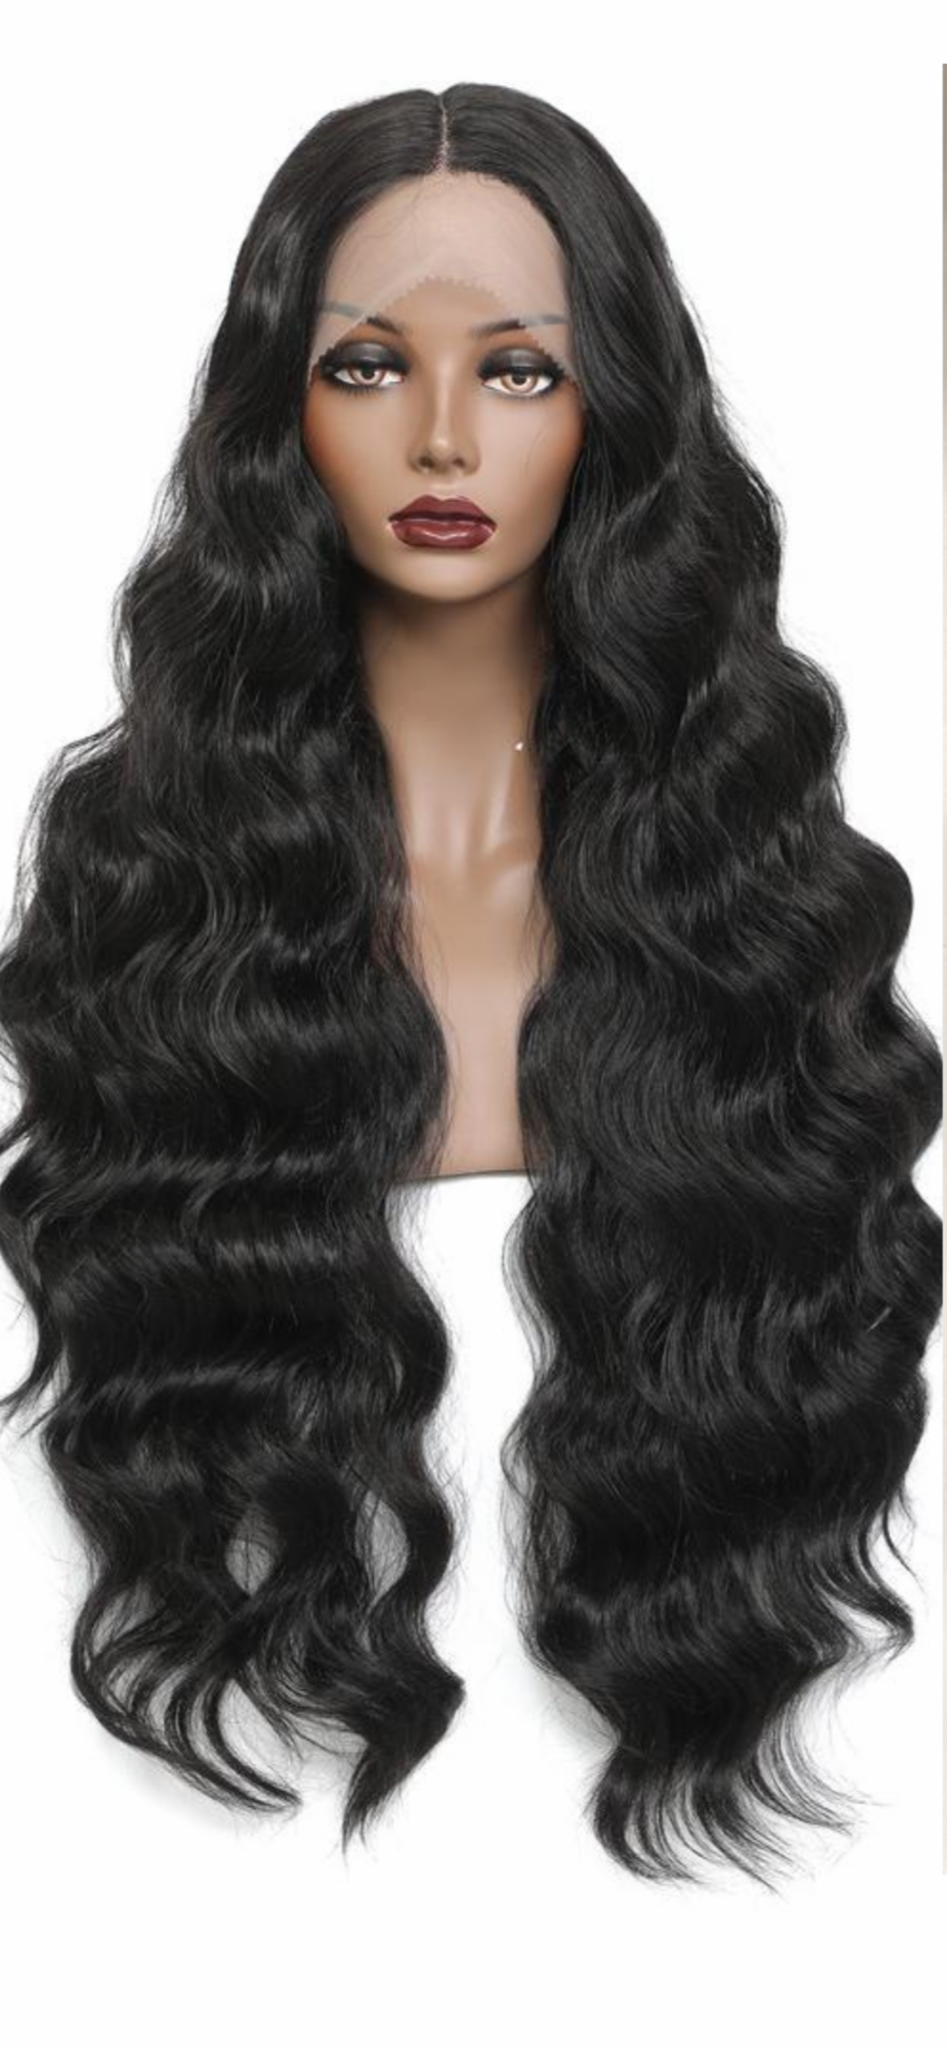 Nicole Blended Lace Wig